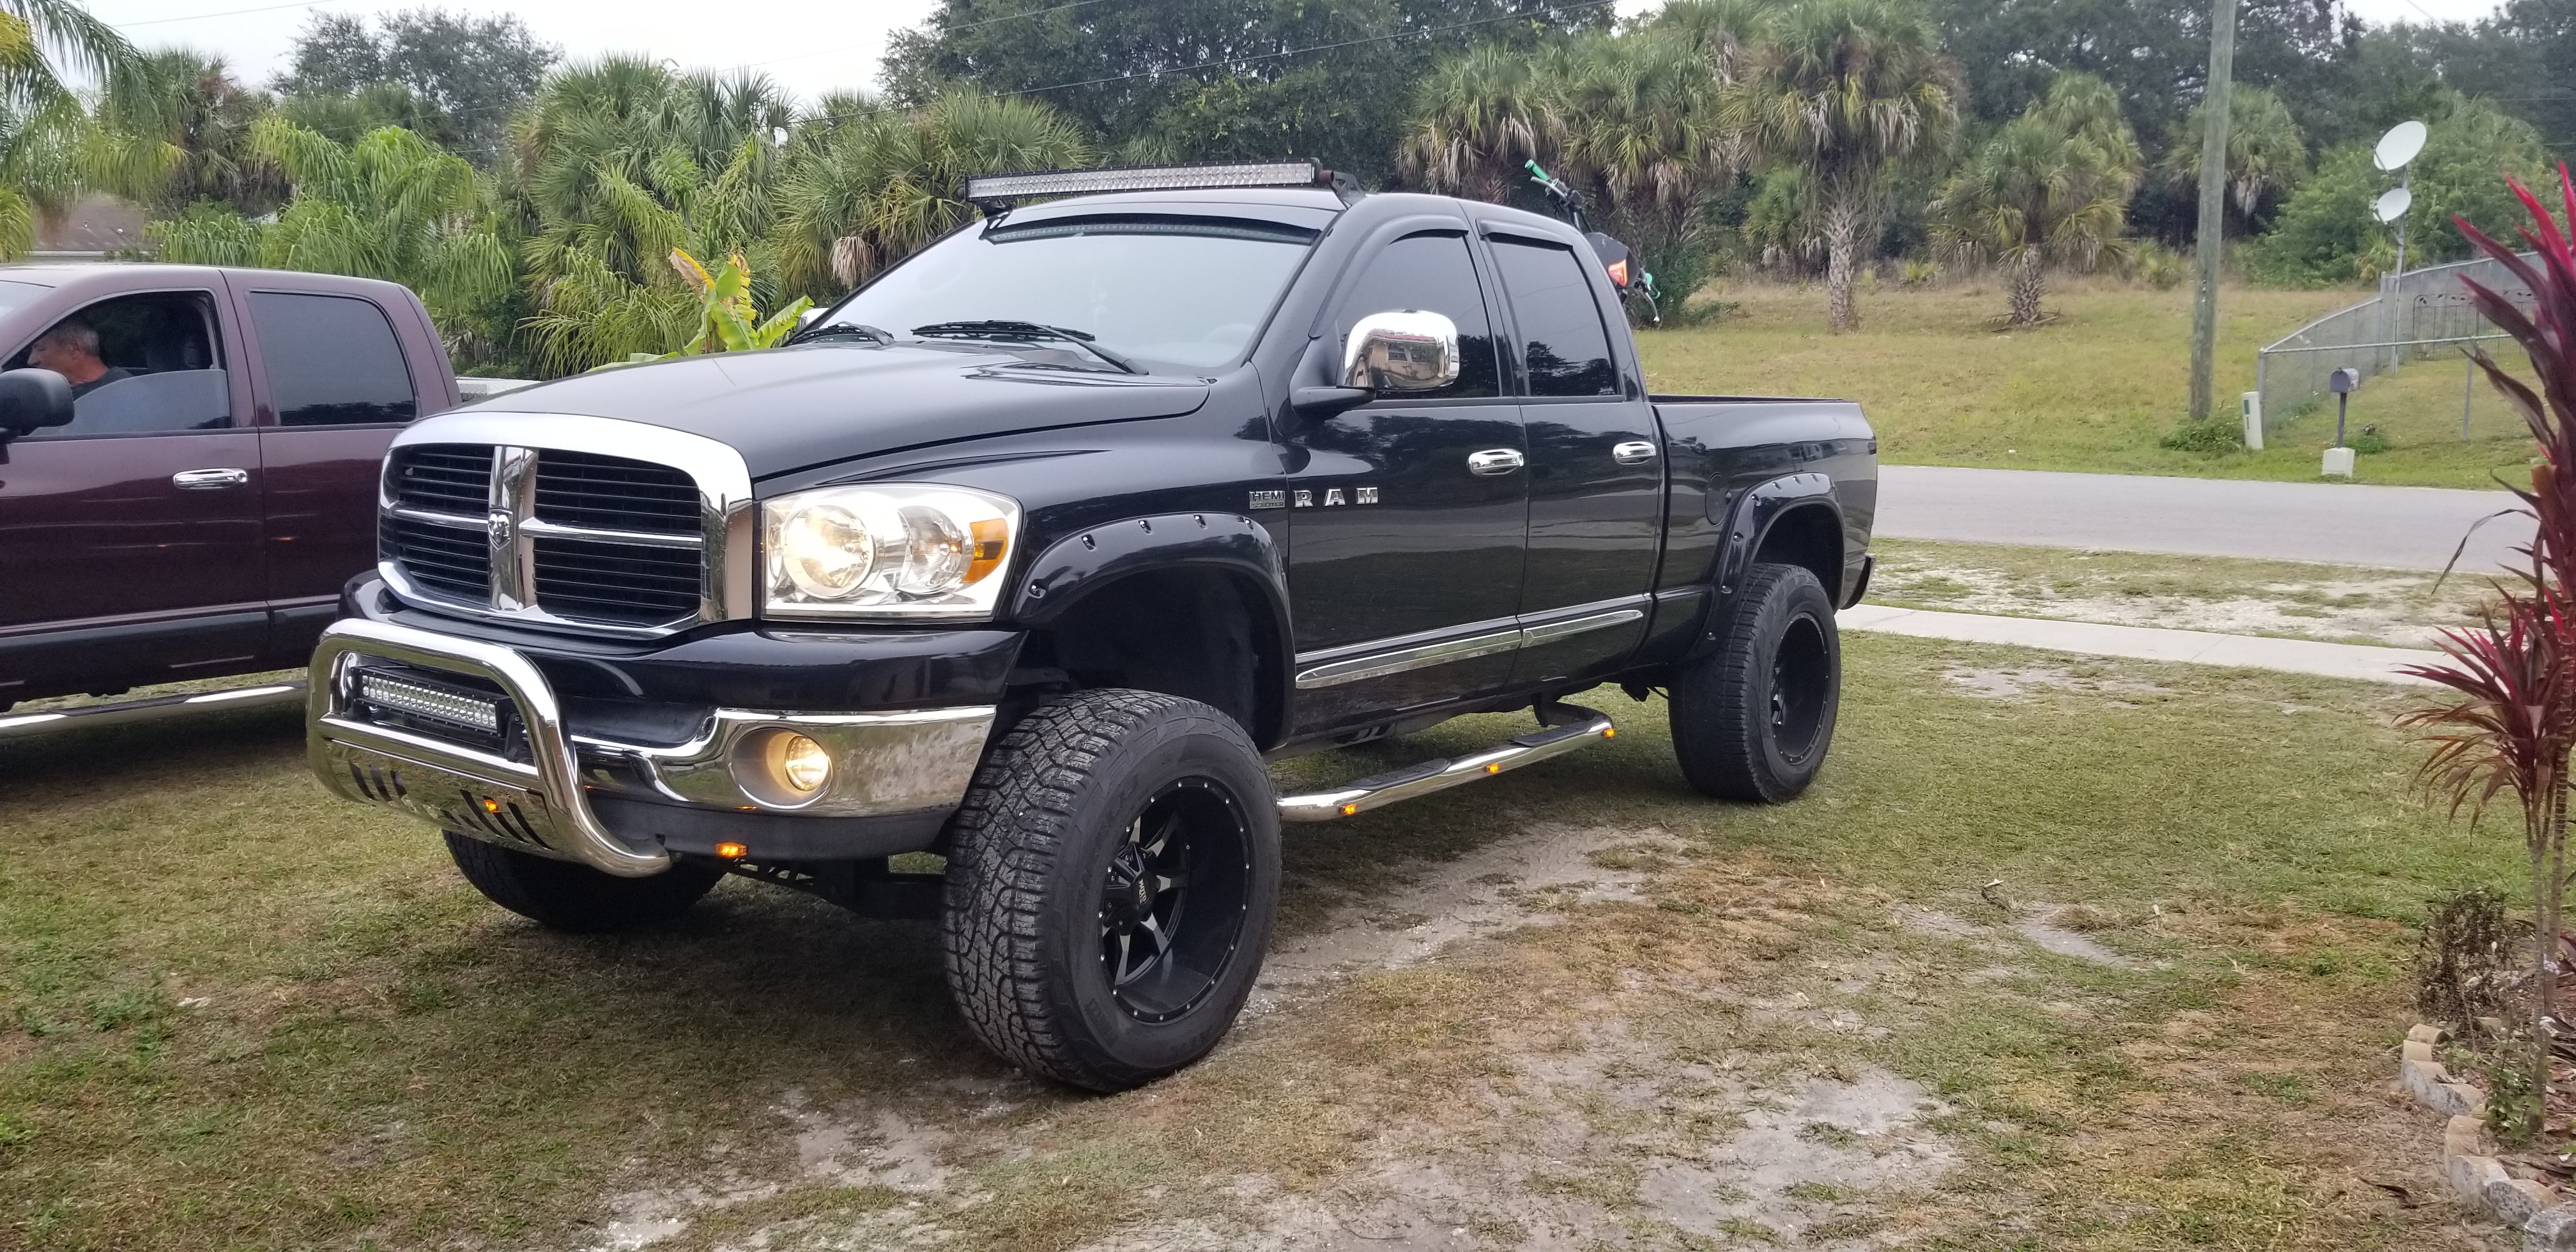 1500 Lift 2wd Rims Suggestions Keeping While Ram Gen 3rd Dodgeforum.